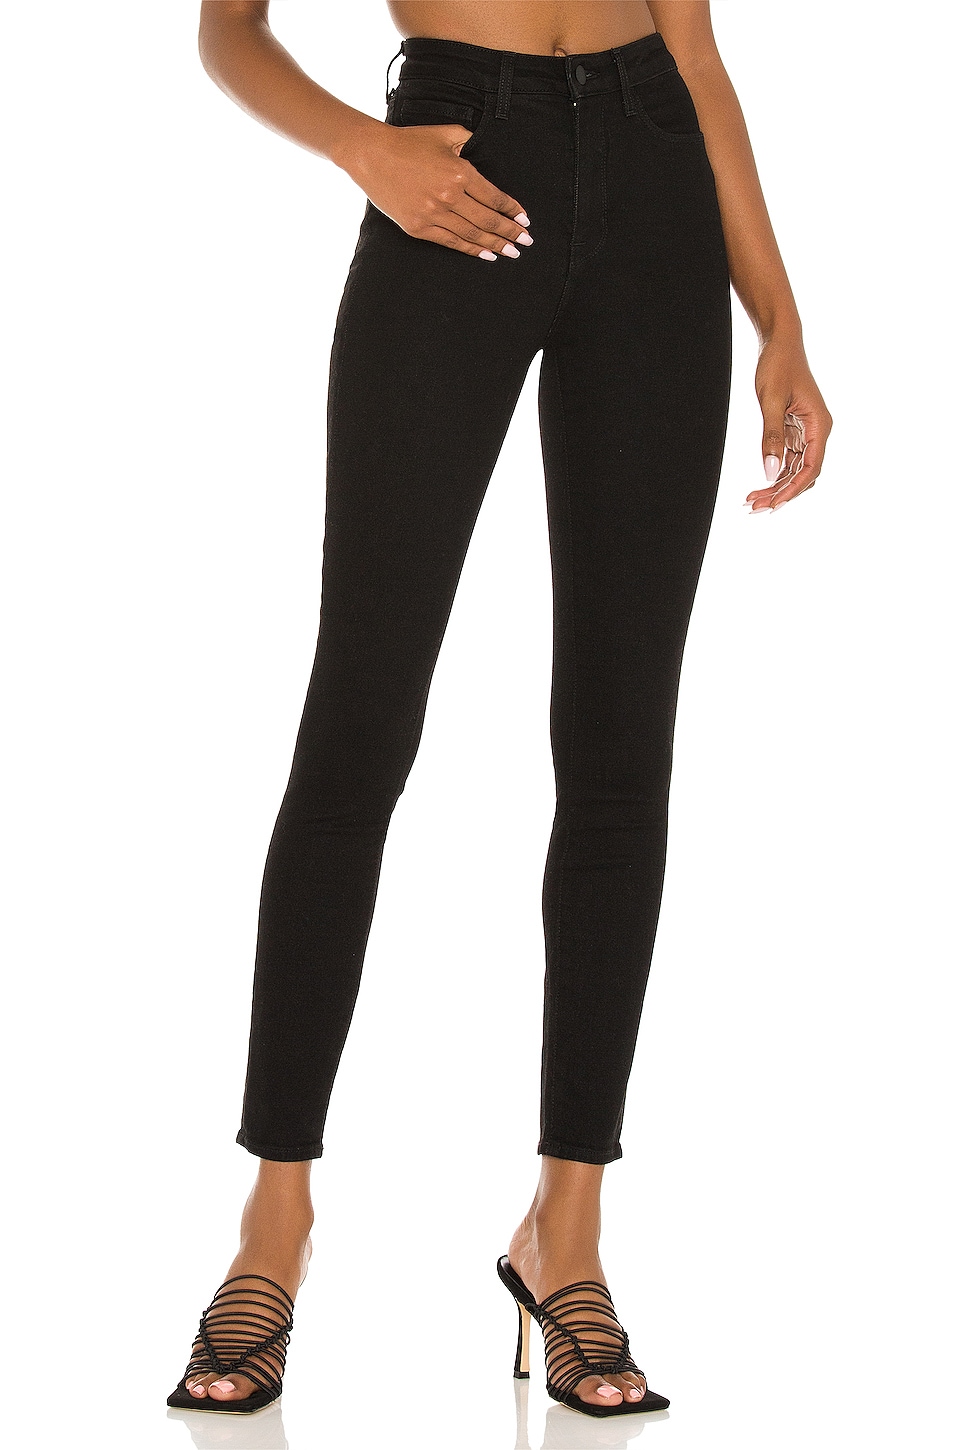 L'AGENCE Monique Ultra high Rise Skinny in Parkway | REVOLVE